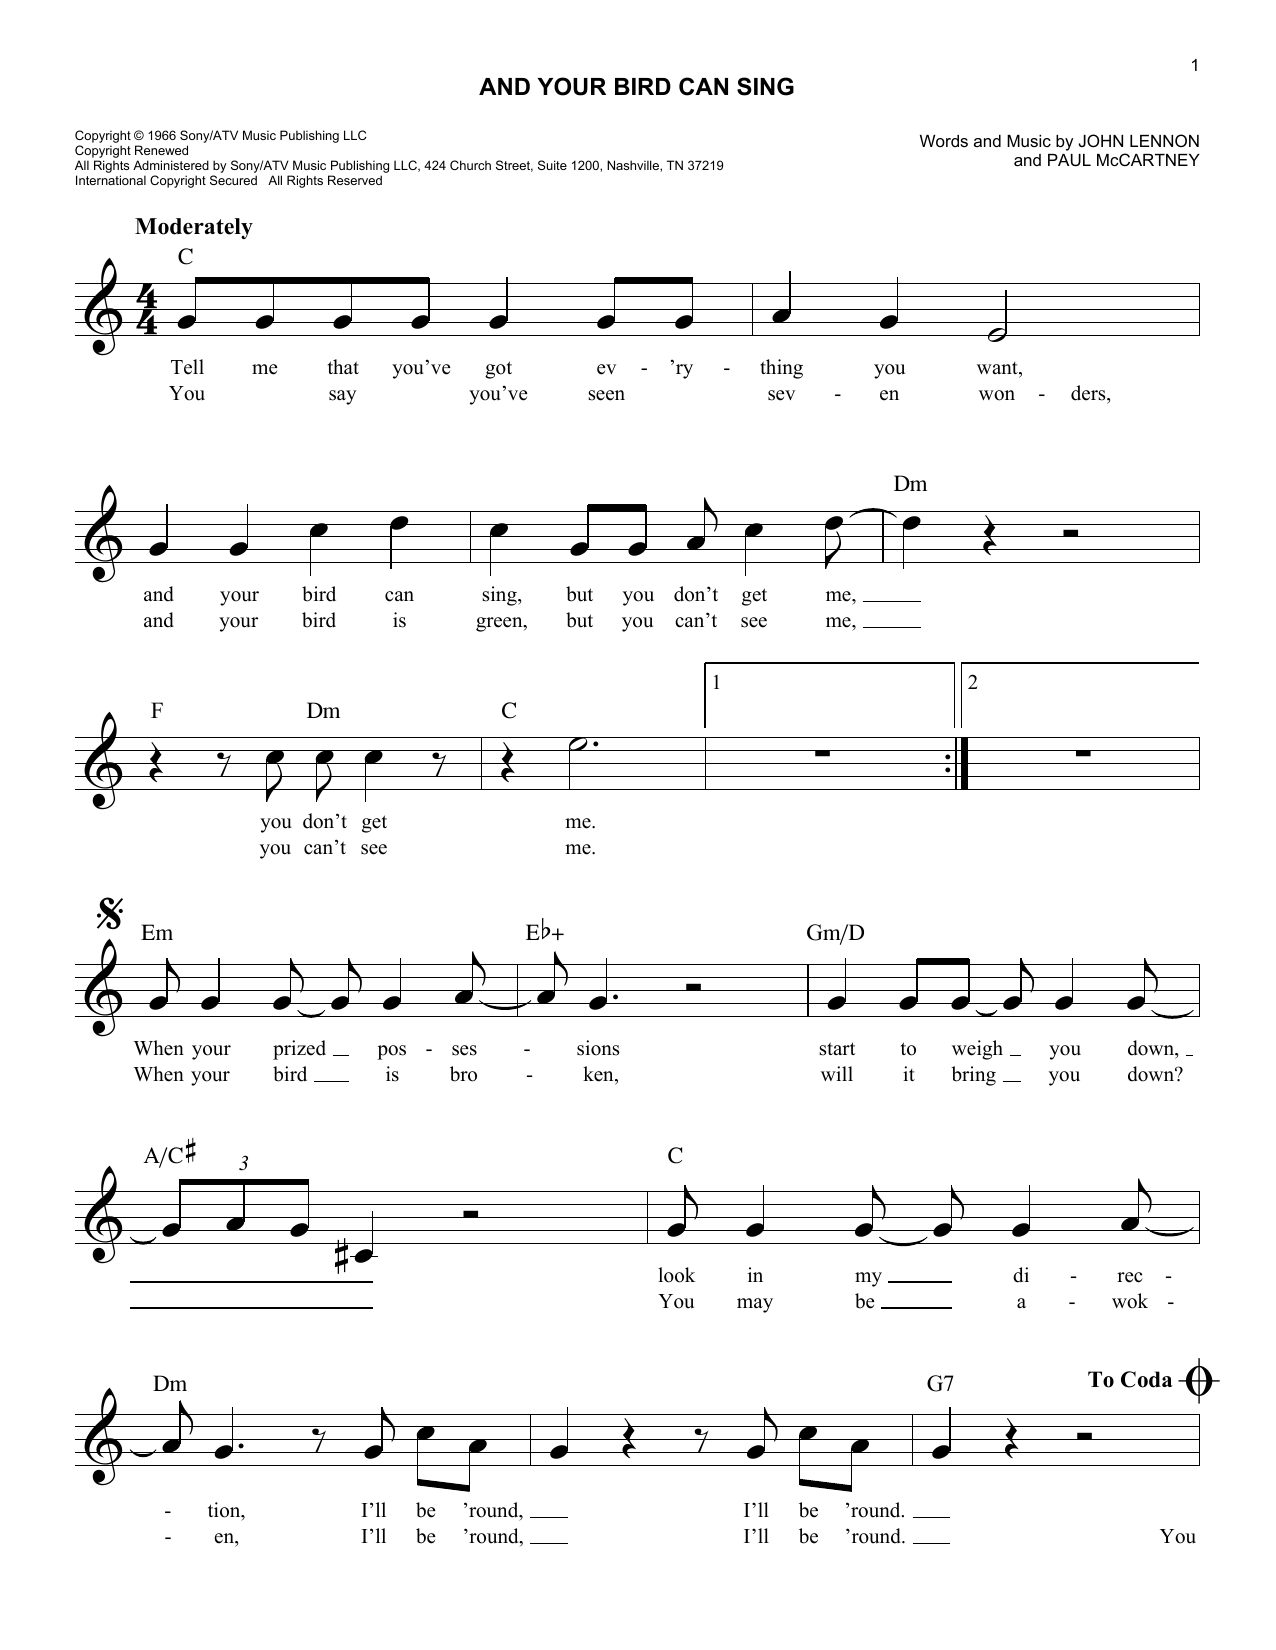 Download The Beatles And Your Bird Can Sing Sheet Music